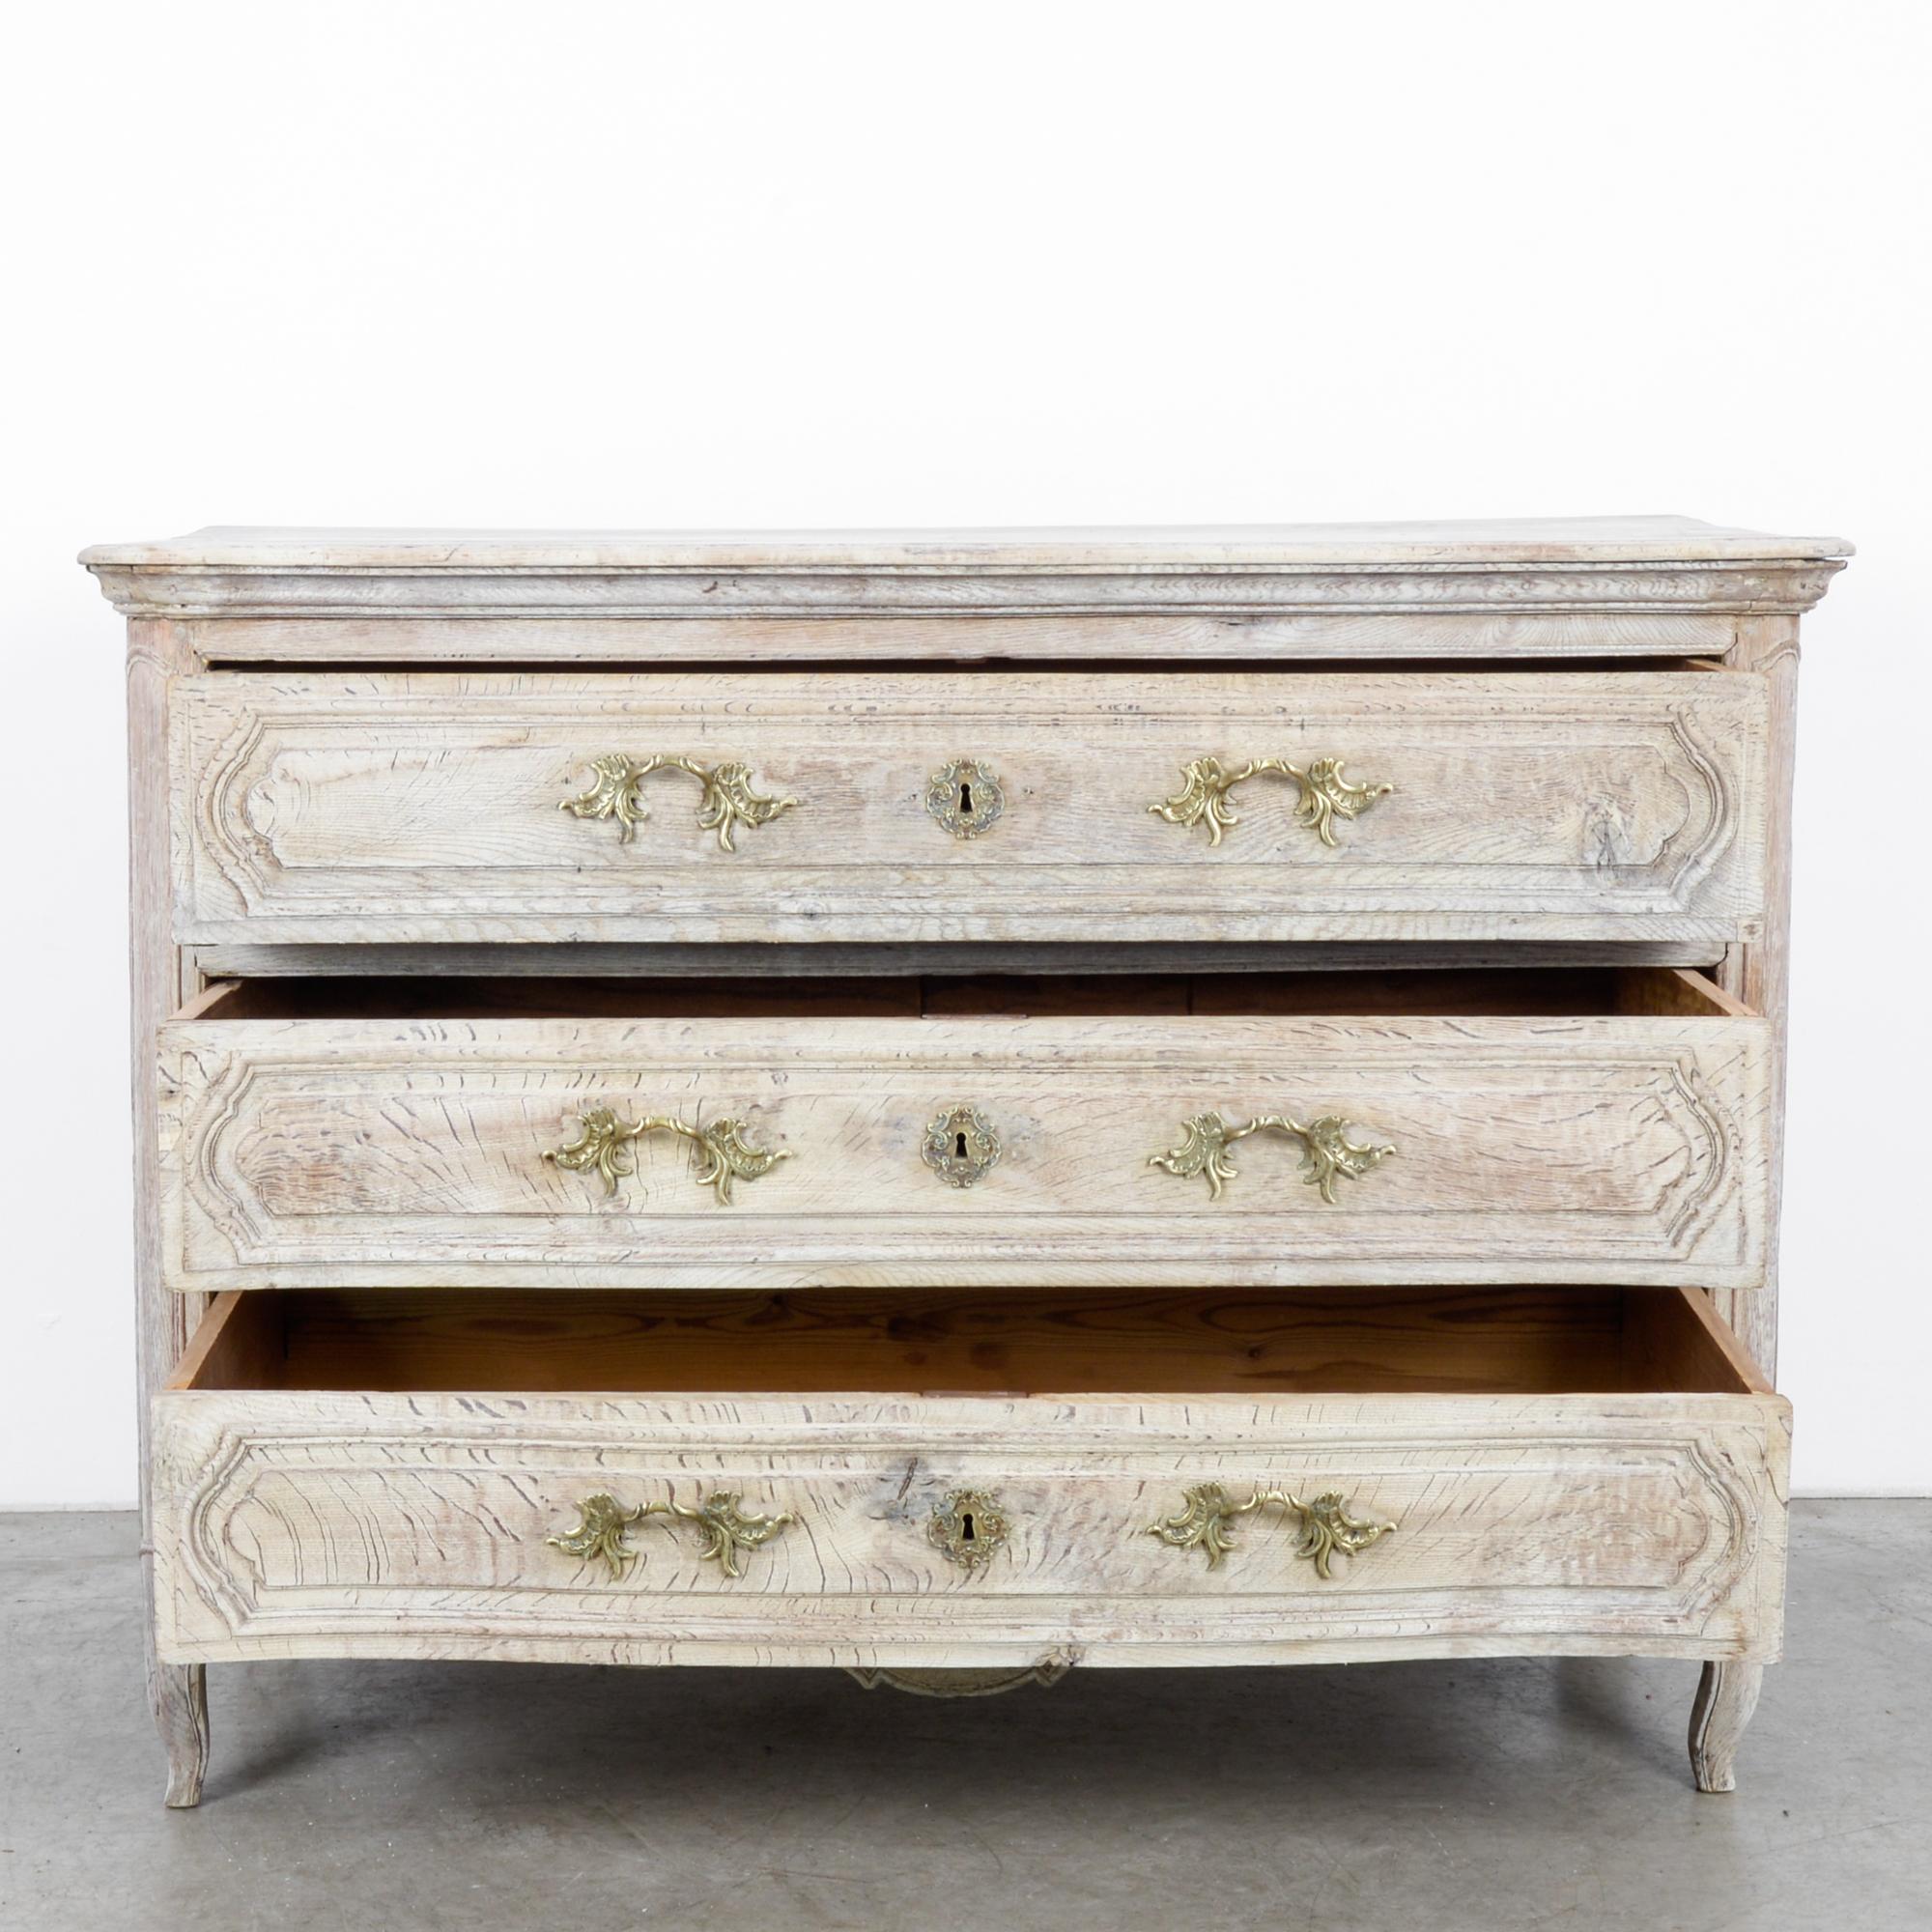 This bleached oak chest of drawers was made in France, circa 1820. It flaunts a smooth finish, which highlights the distinctive wood grain. Elevated on cabriole legs, the chest features three drawers with decorative locks and pulls. The scalloped